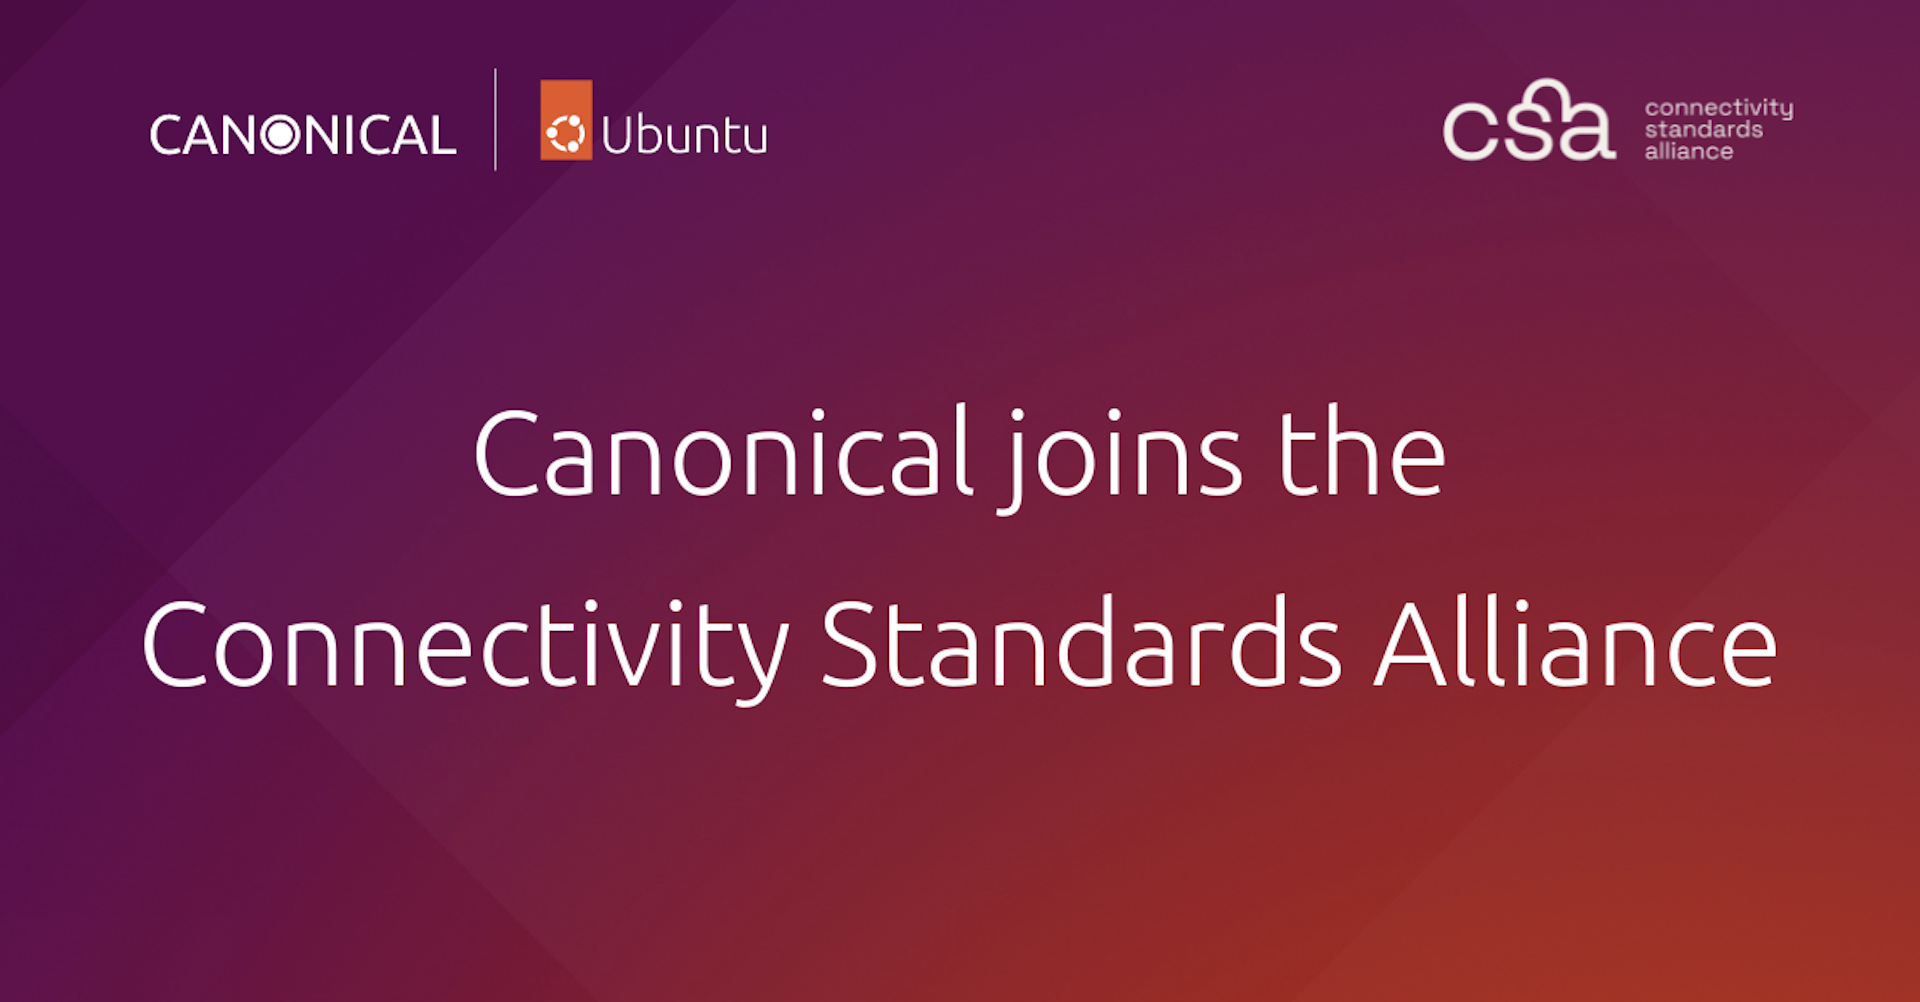 Canonical joins the Connectivity Standards Alliance  Ubuntu